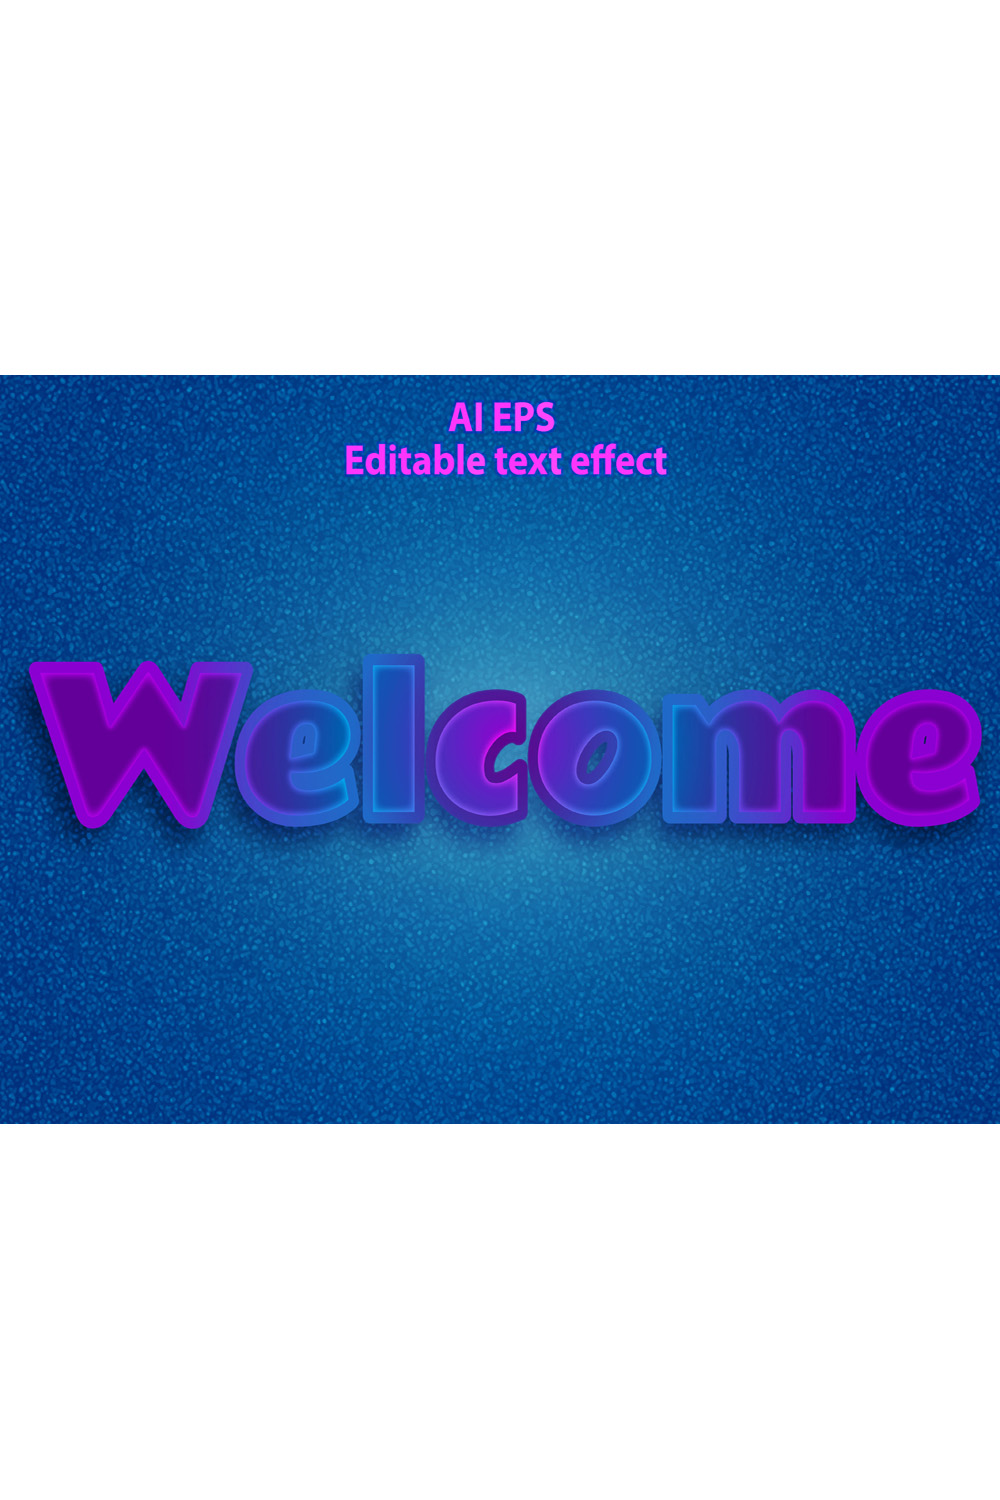 A blue background with a welcome text in purple and pink 3d text effect pinterest preview image.